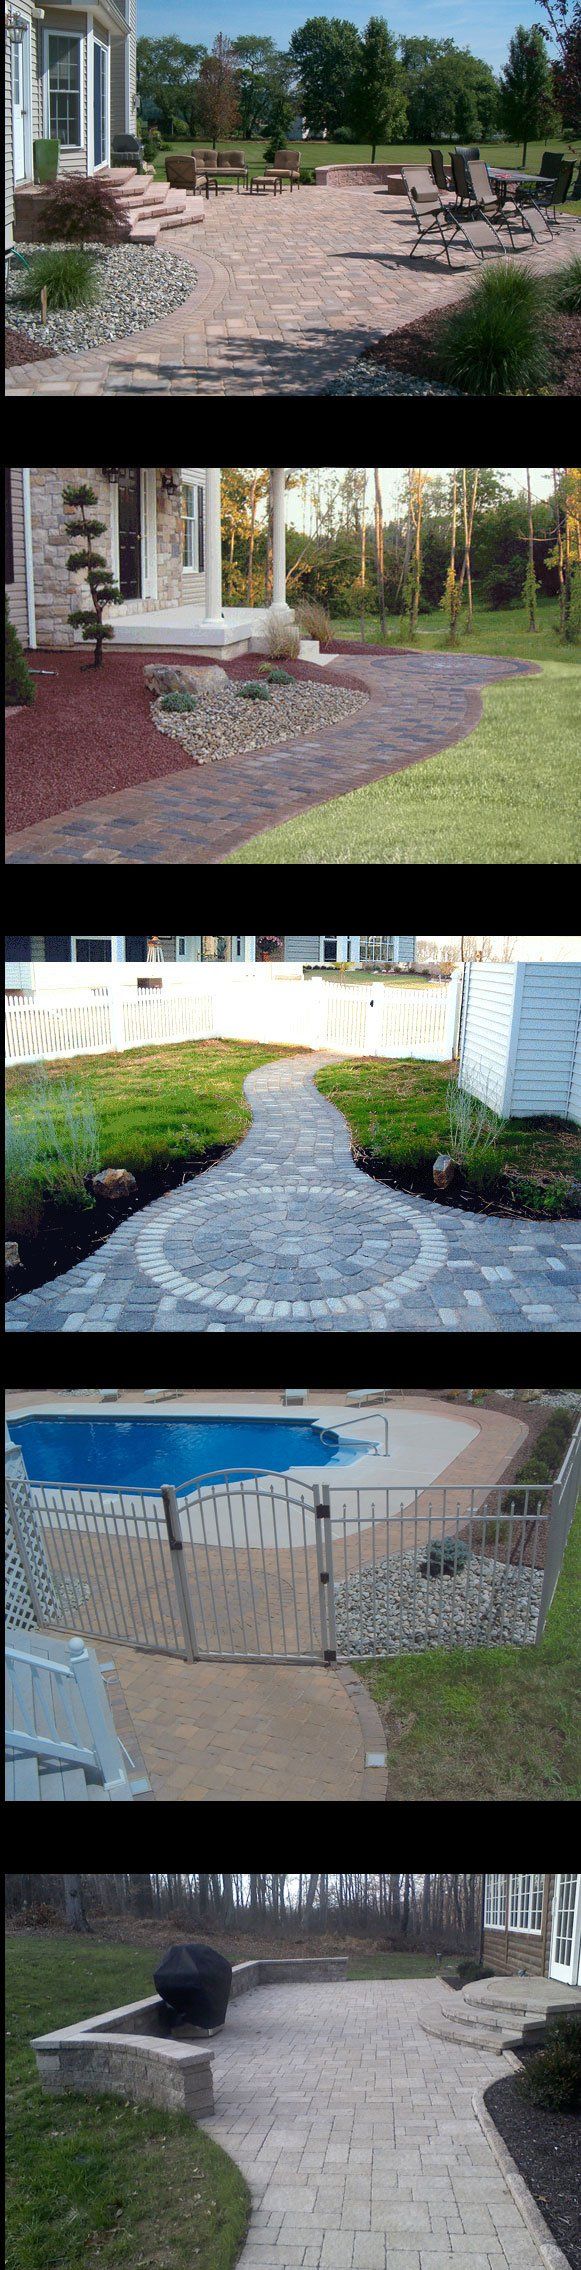 Lanscaping — Set 1 of Before and After of Landscape Design in Bethlehem, PA